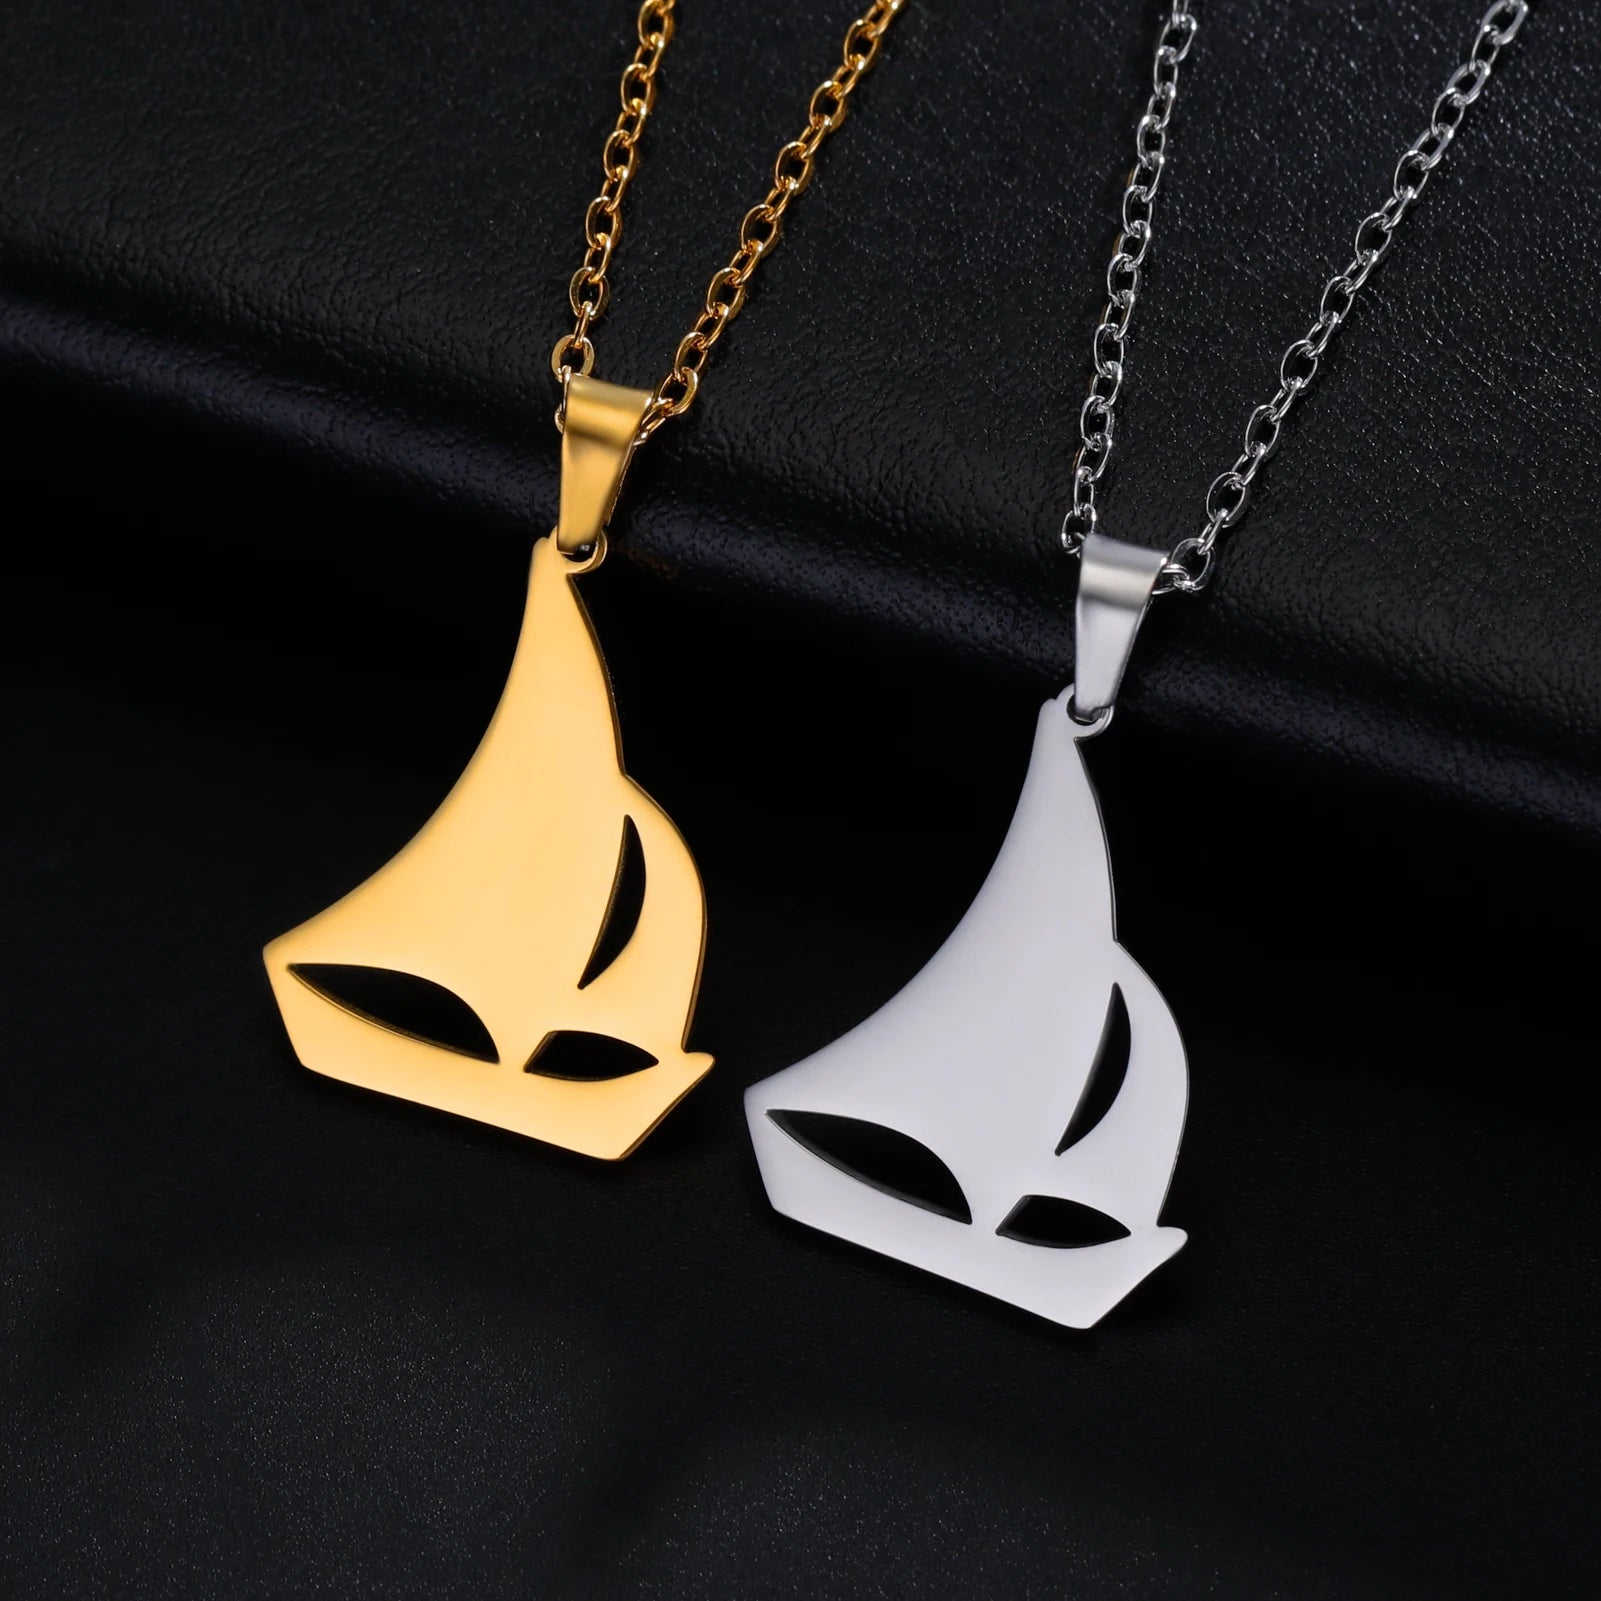 Sailboat Stainless Steel Ocean Necklace - Madeinsea©